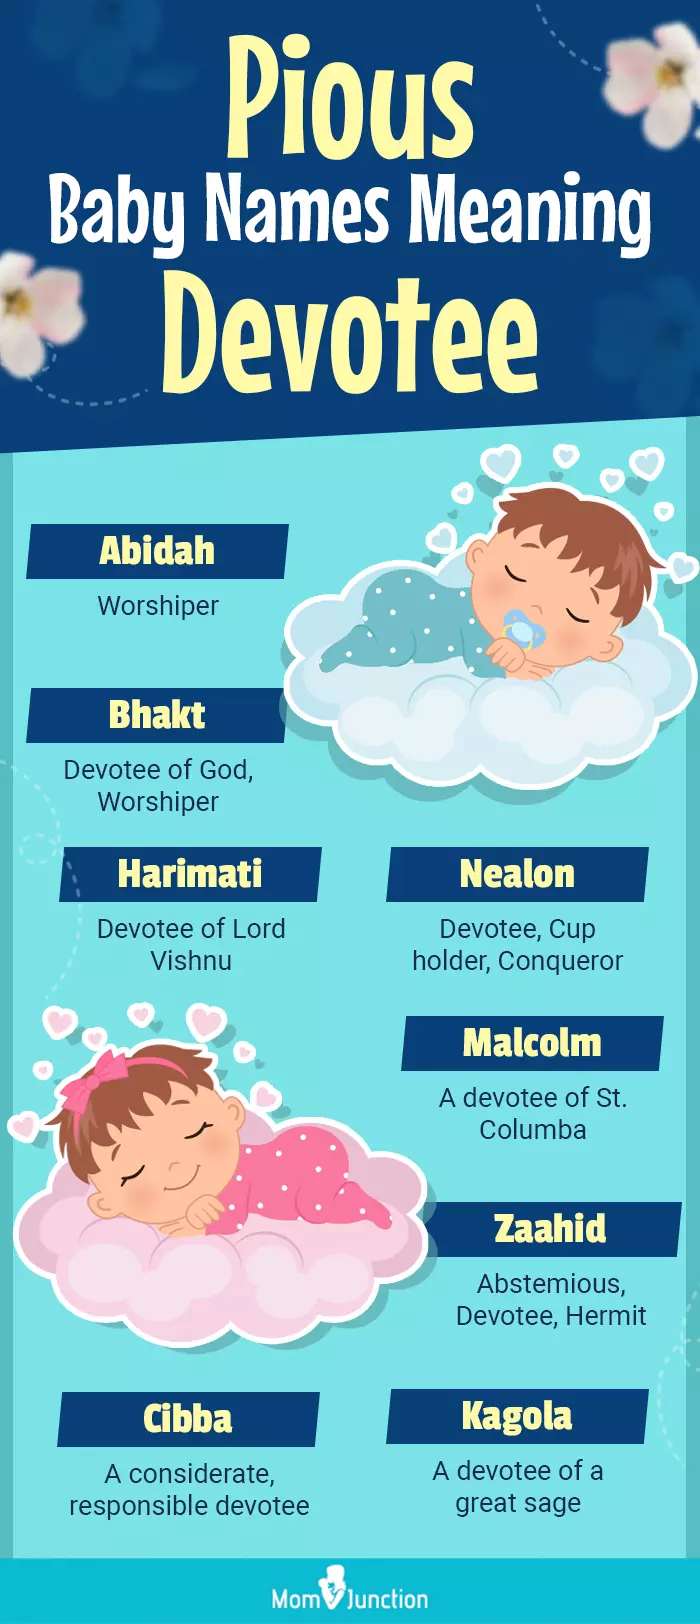 pious baby names meaning devotee (infographic)